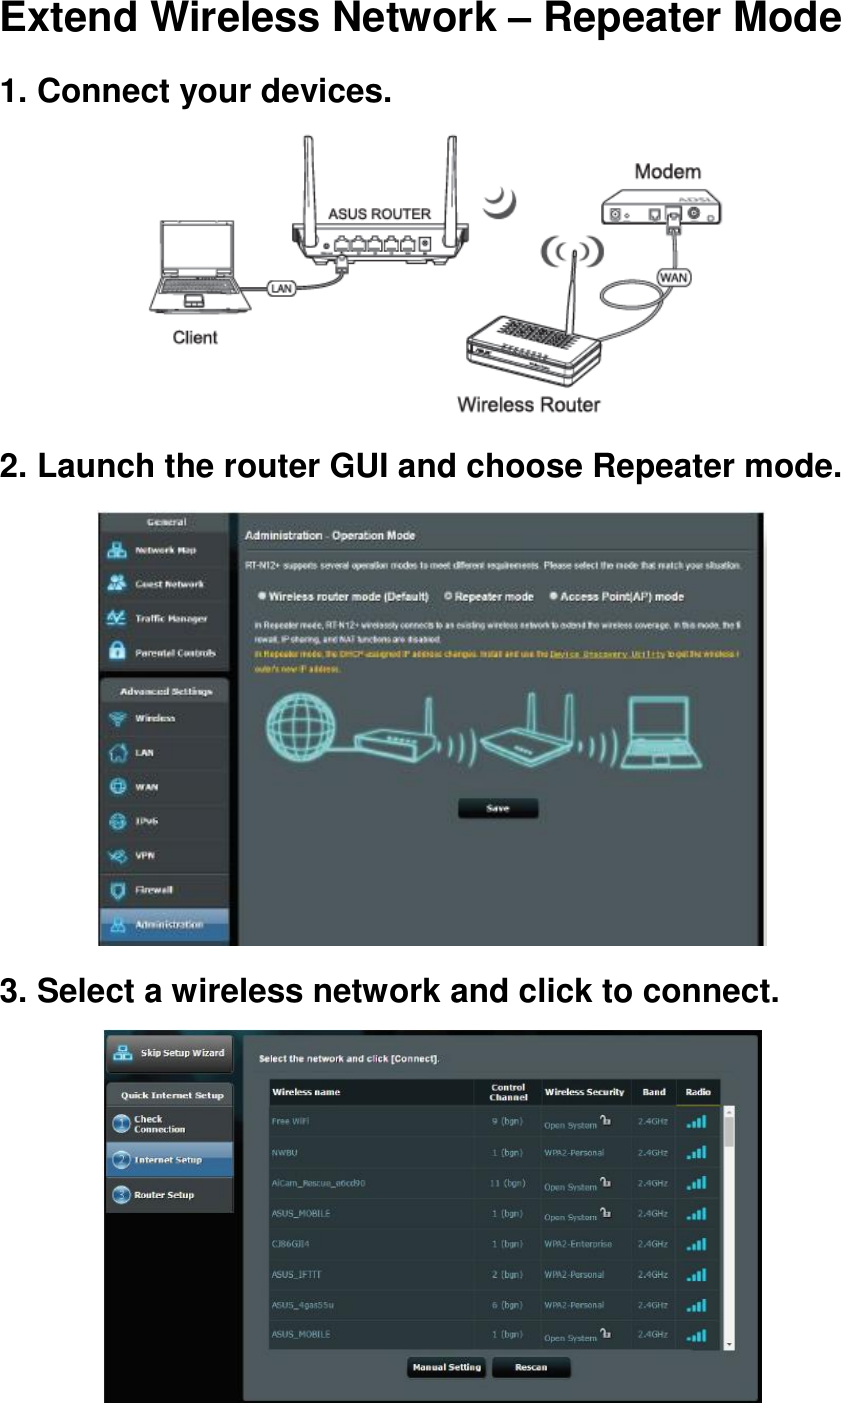 Extend Wireless Network – Repeater Mode 1. Connect your devices.  2. Launch the router GUI and choose Repeater mode.  3. Select a wireless network and click to connect.  